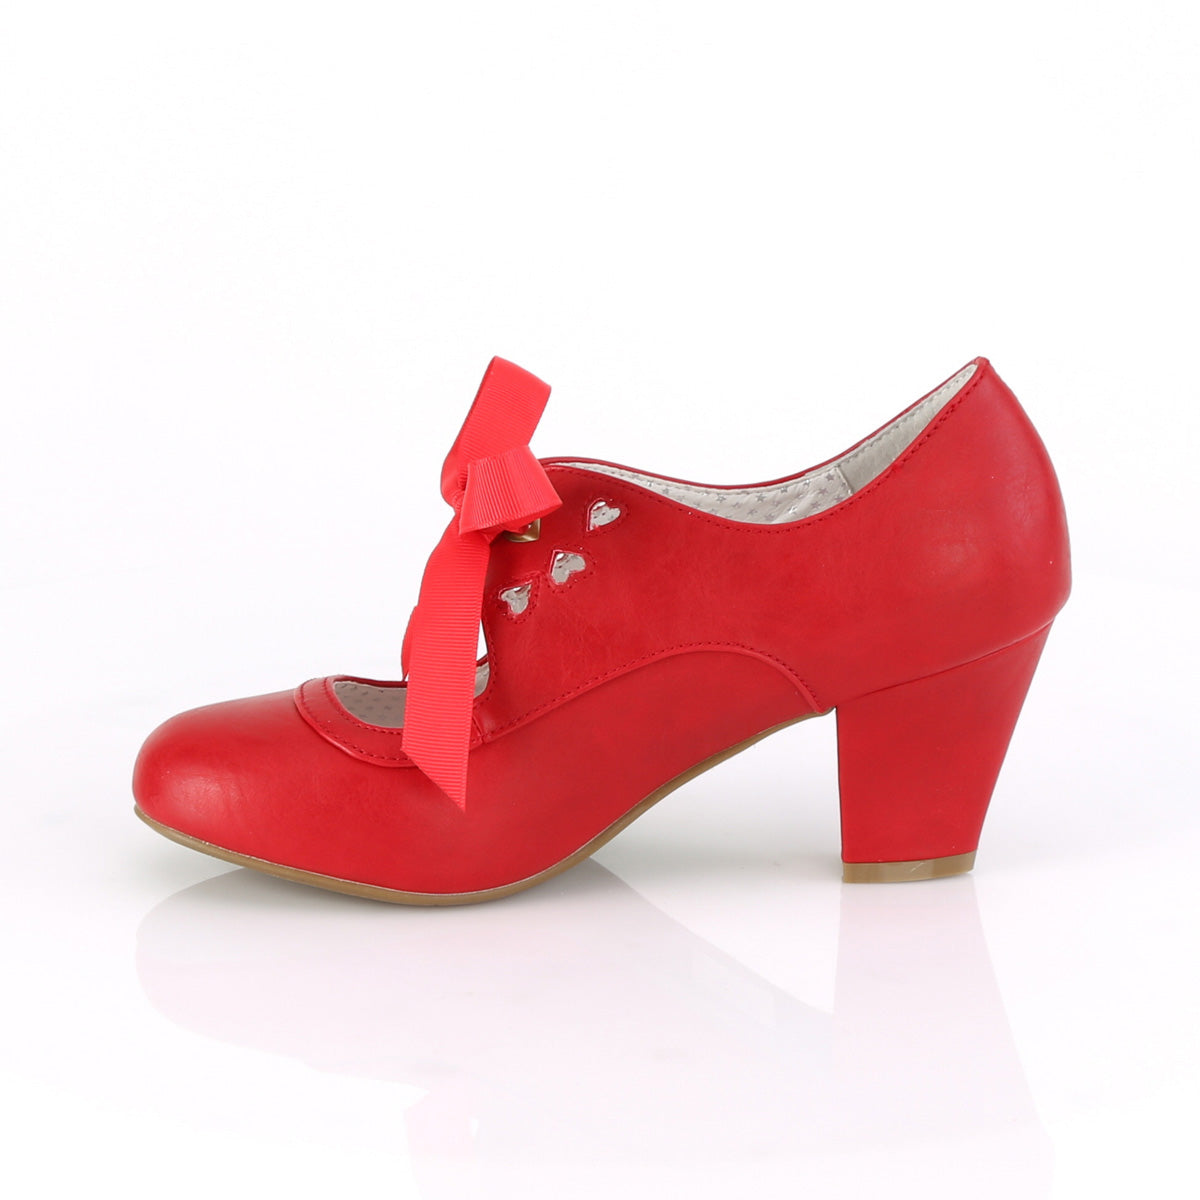 WIGGLE-32 Pin Up Couture Red Faux Leather Single Soles [Sexy Shoes]